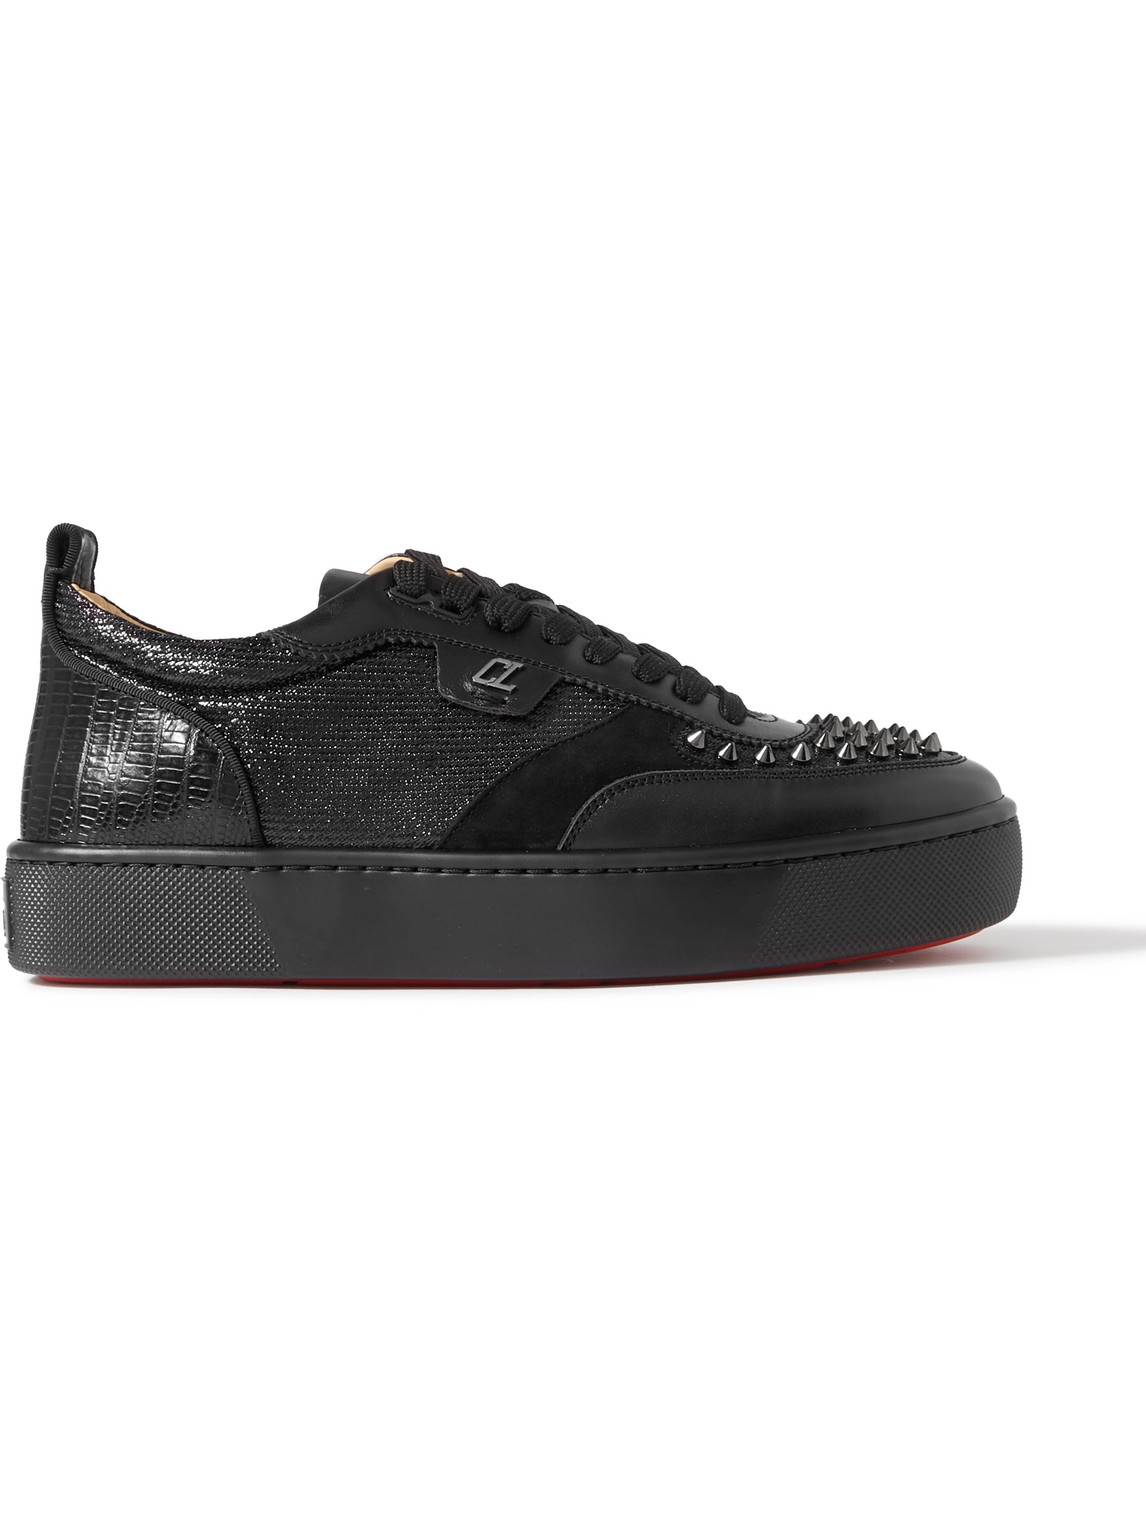 Christian Louboutin Happrui Spikes Suede And Leather-trimmed Mesh Sneakers In Black